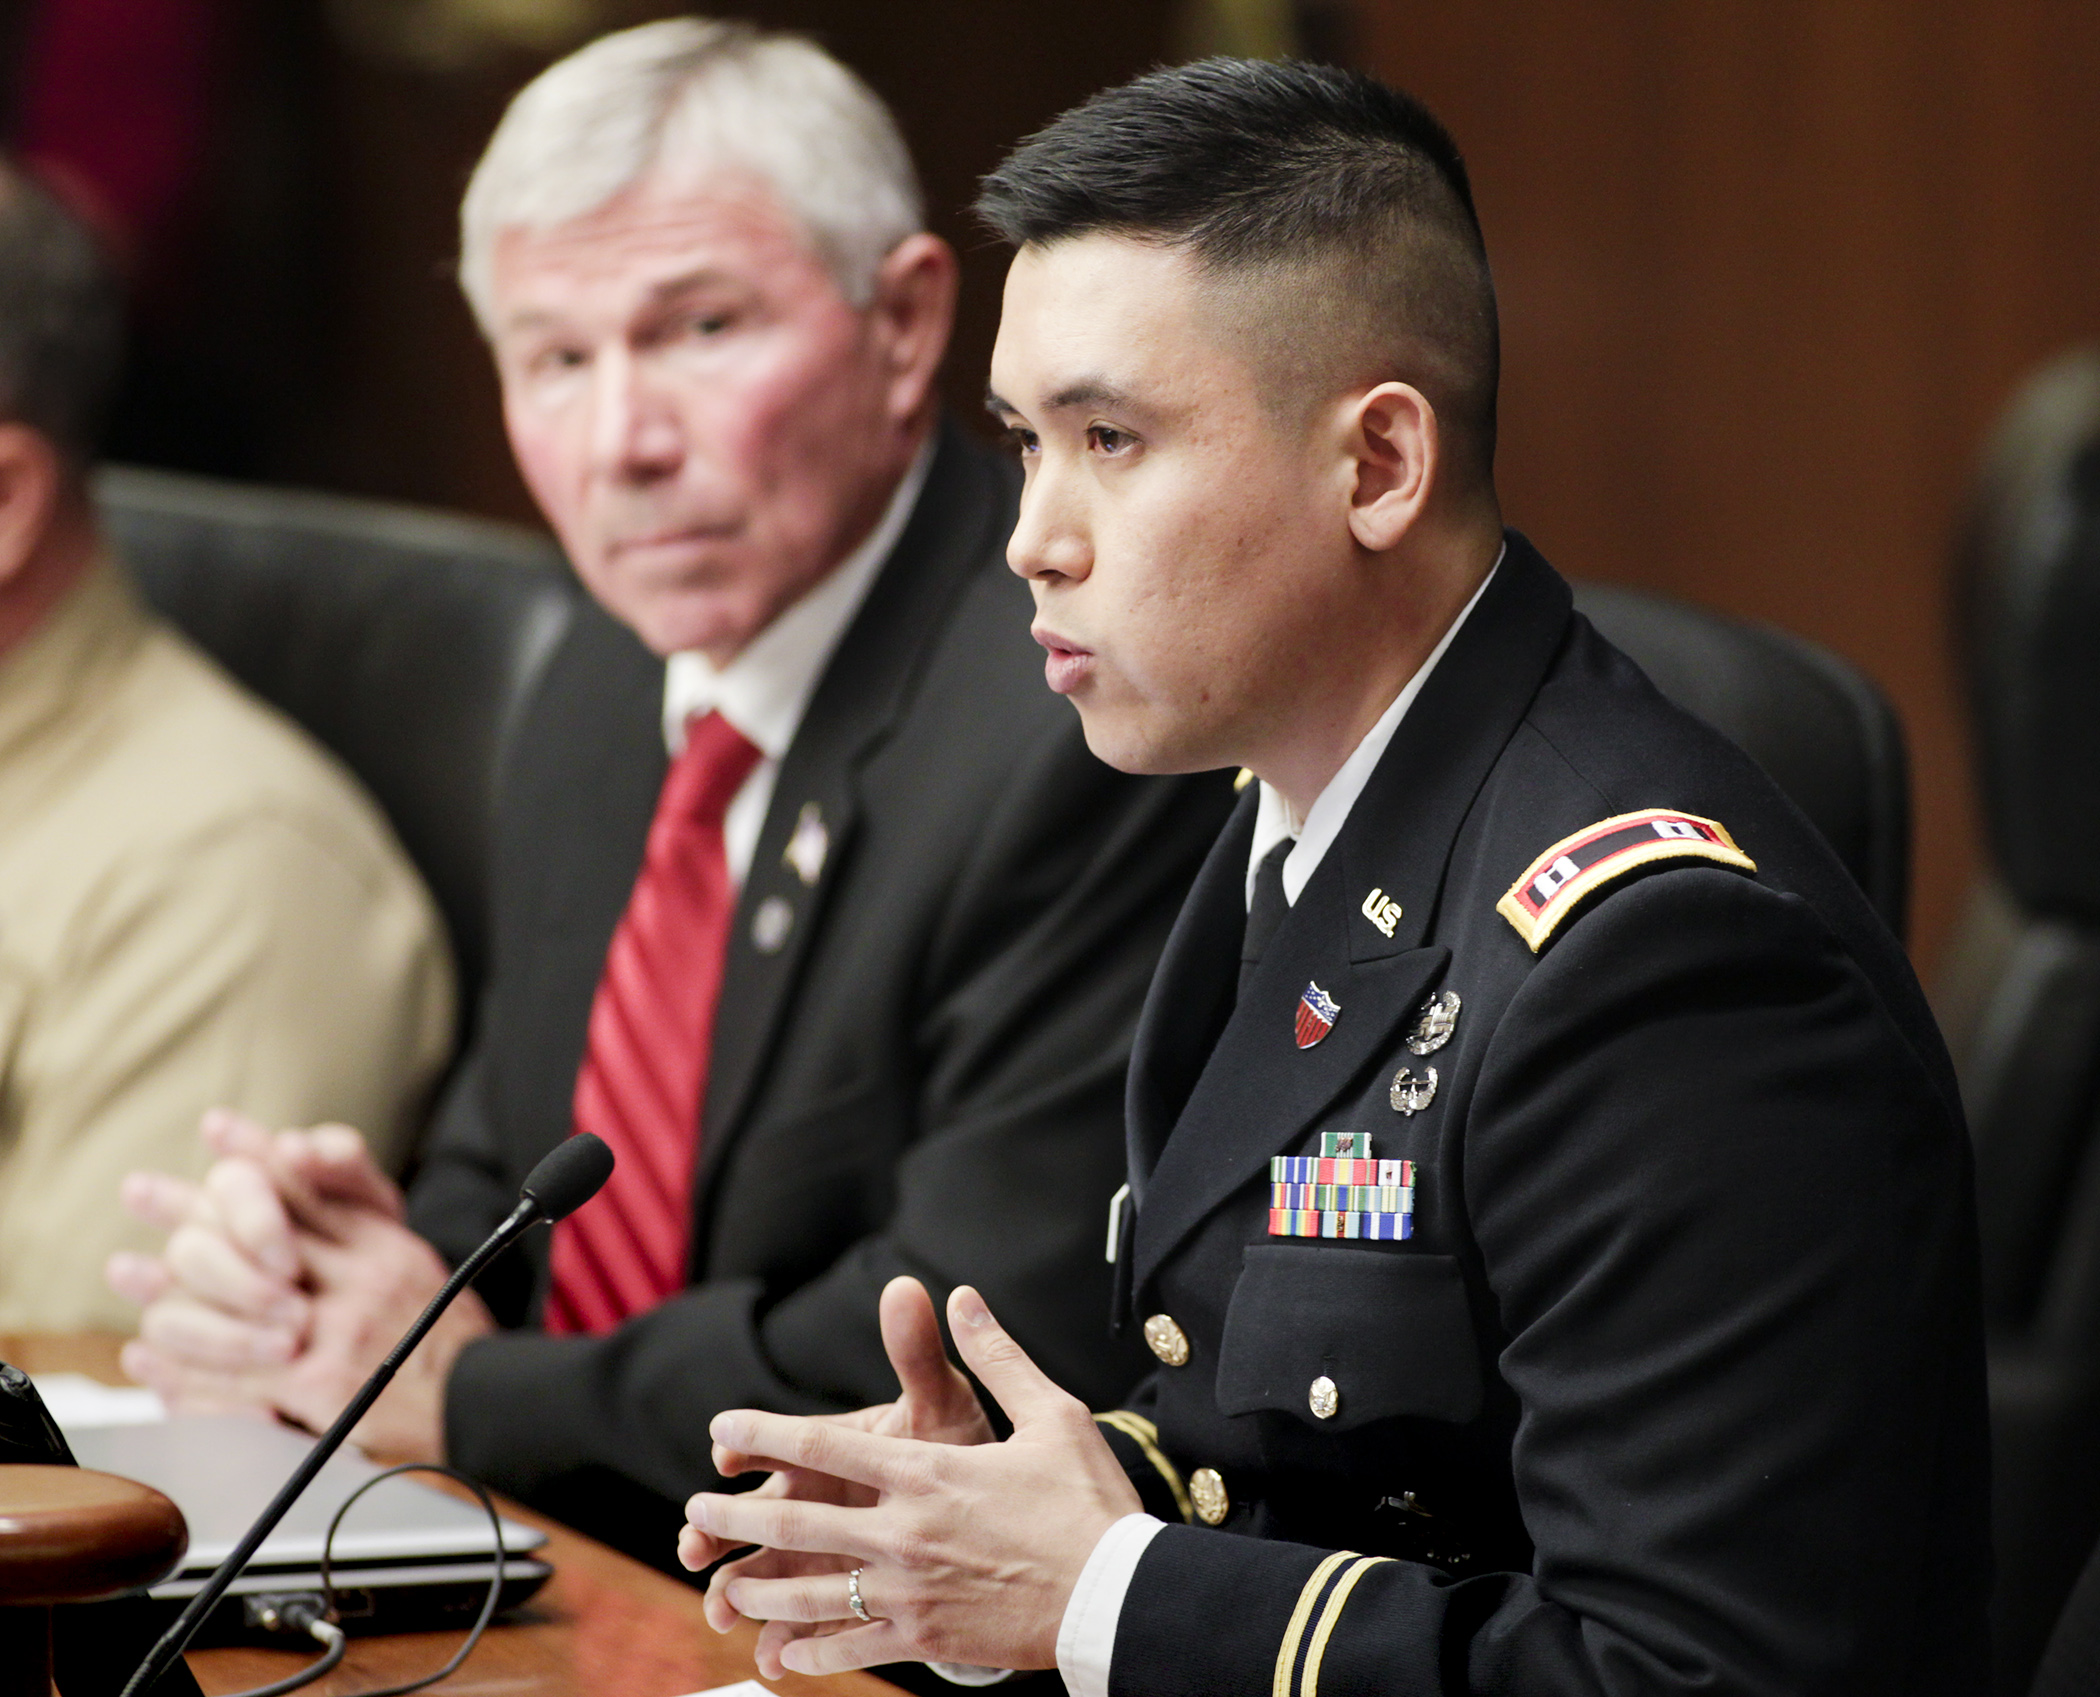 U.S. Army Capt. Young Youn of the St. Paul Recruiting Company testifies during the House Veterans Affairs Division Feb. 26 on Rep. Bob Dettmer’s bill, HF2907, which would, in part, require school counselors to inform students of armed forces career options. Photo by Paul Battaglia